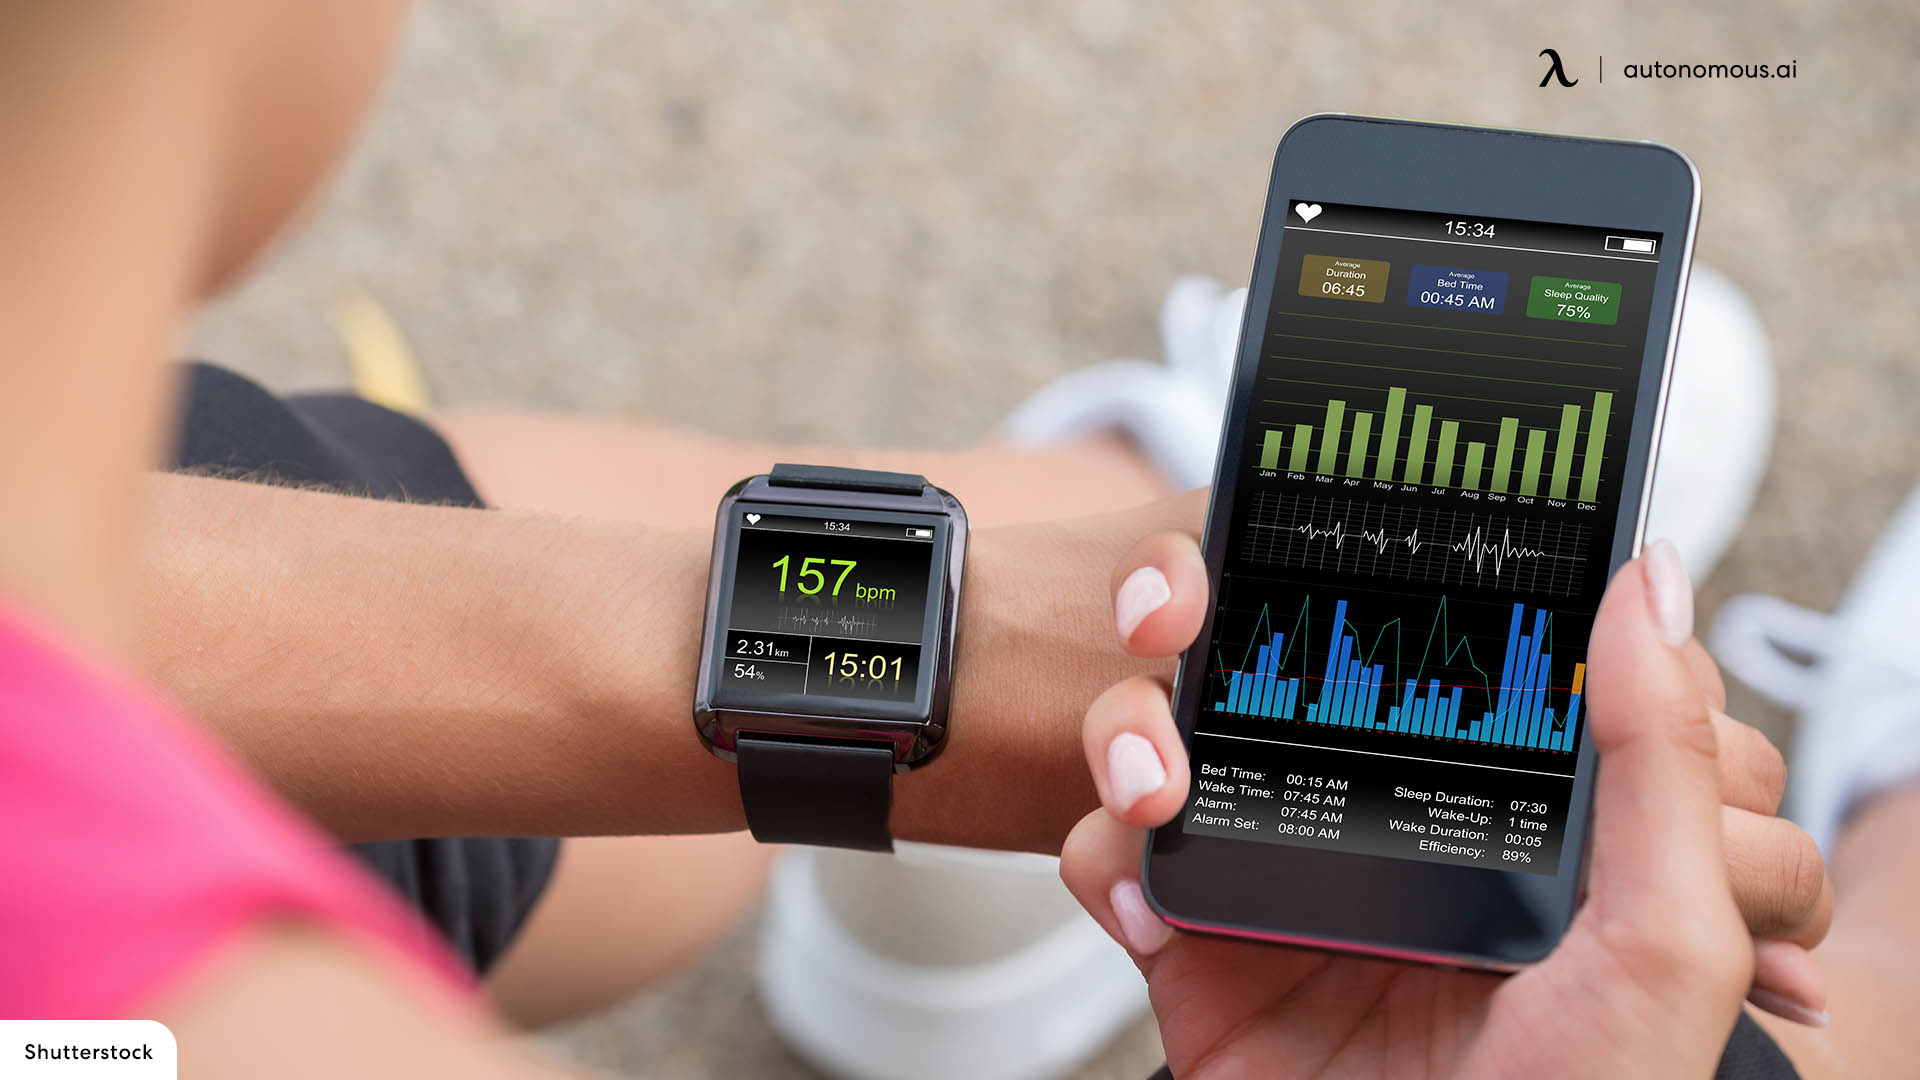 Fitness Watch Reviews 2022: Which One Is the Best?